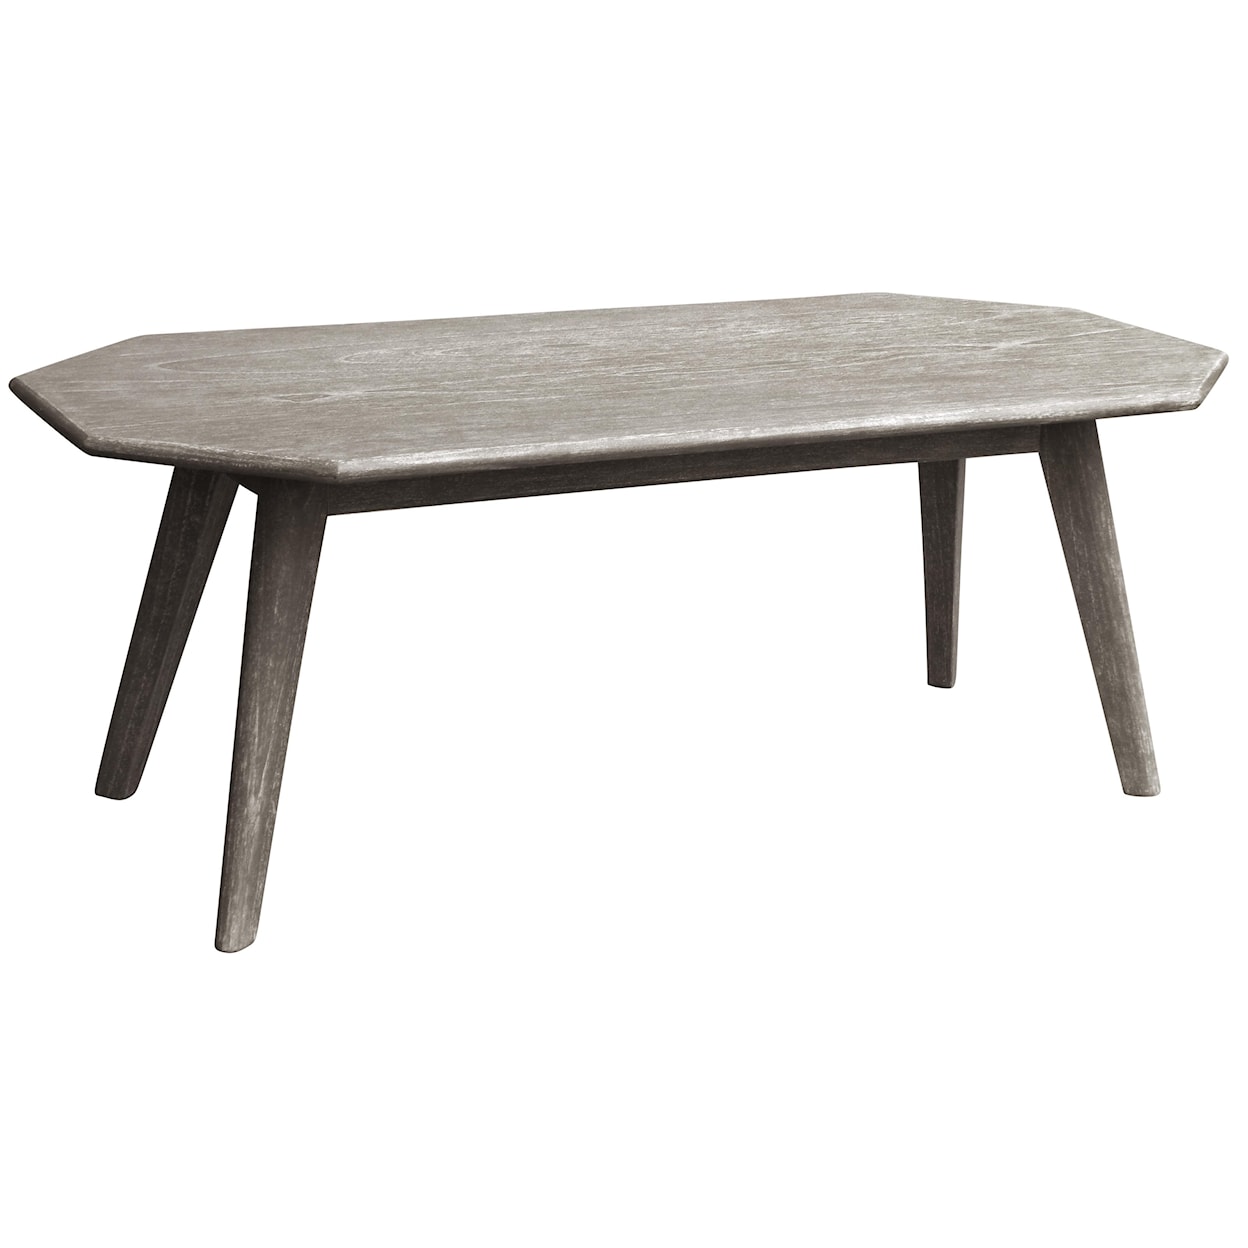 Trade Winds Furniture Occasional Table Groups Nantucket Coffee Table